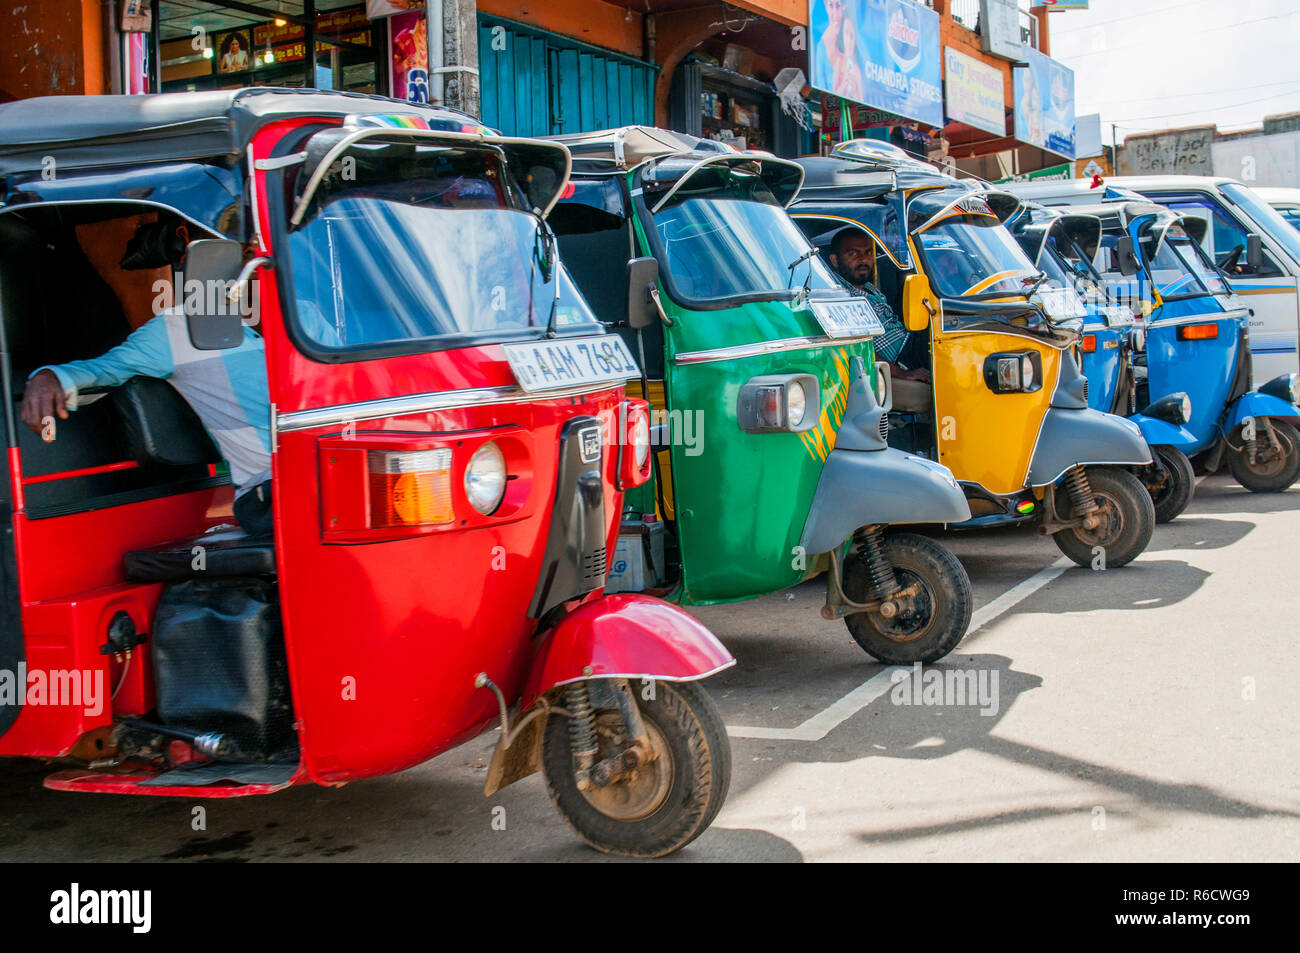 Row Of Red, Green, Yello And Blue Empty Tuk-Tuks Waits For Passengers In Sri Lanka Tuk-Tuk Is A Popular Asian Transport As Taxi Stock Photo